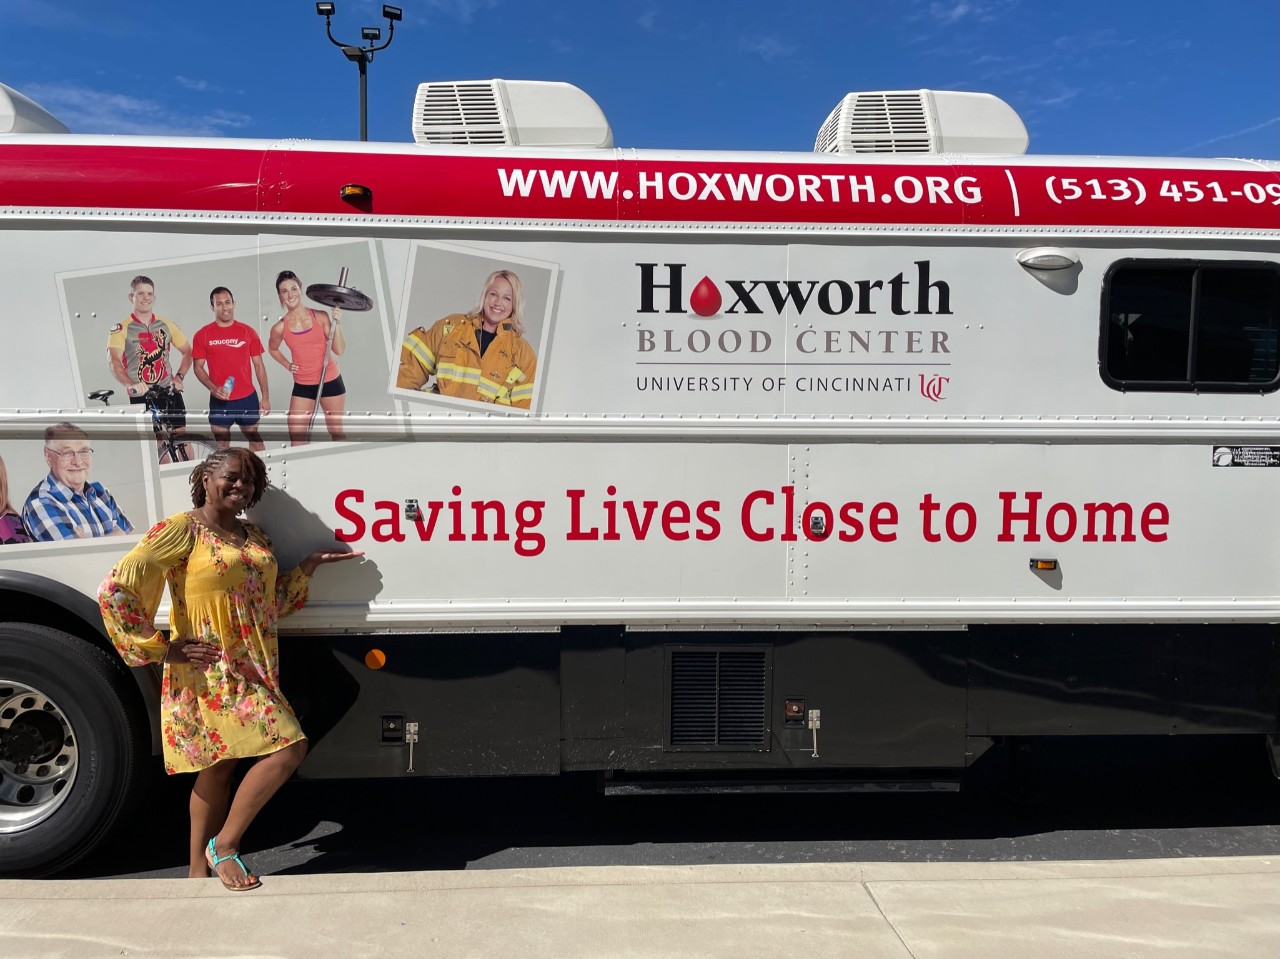 Carla Howard in front of Hoxworth donor bus